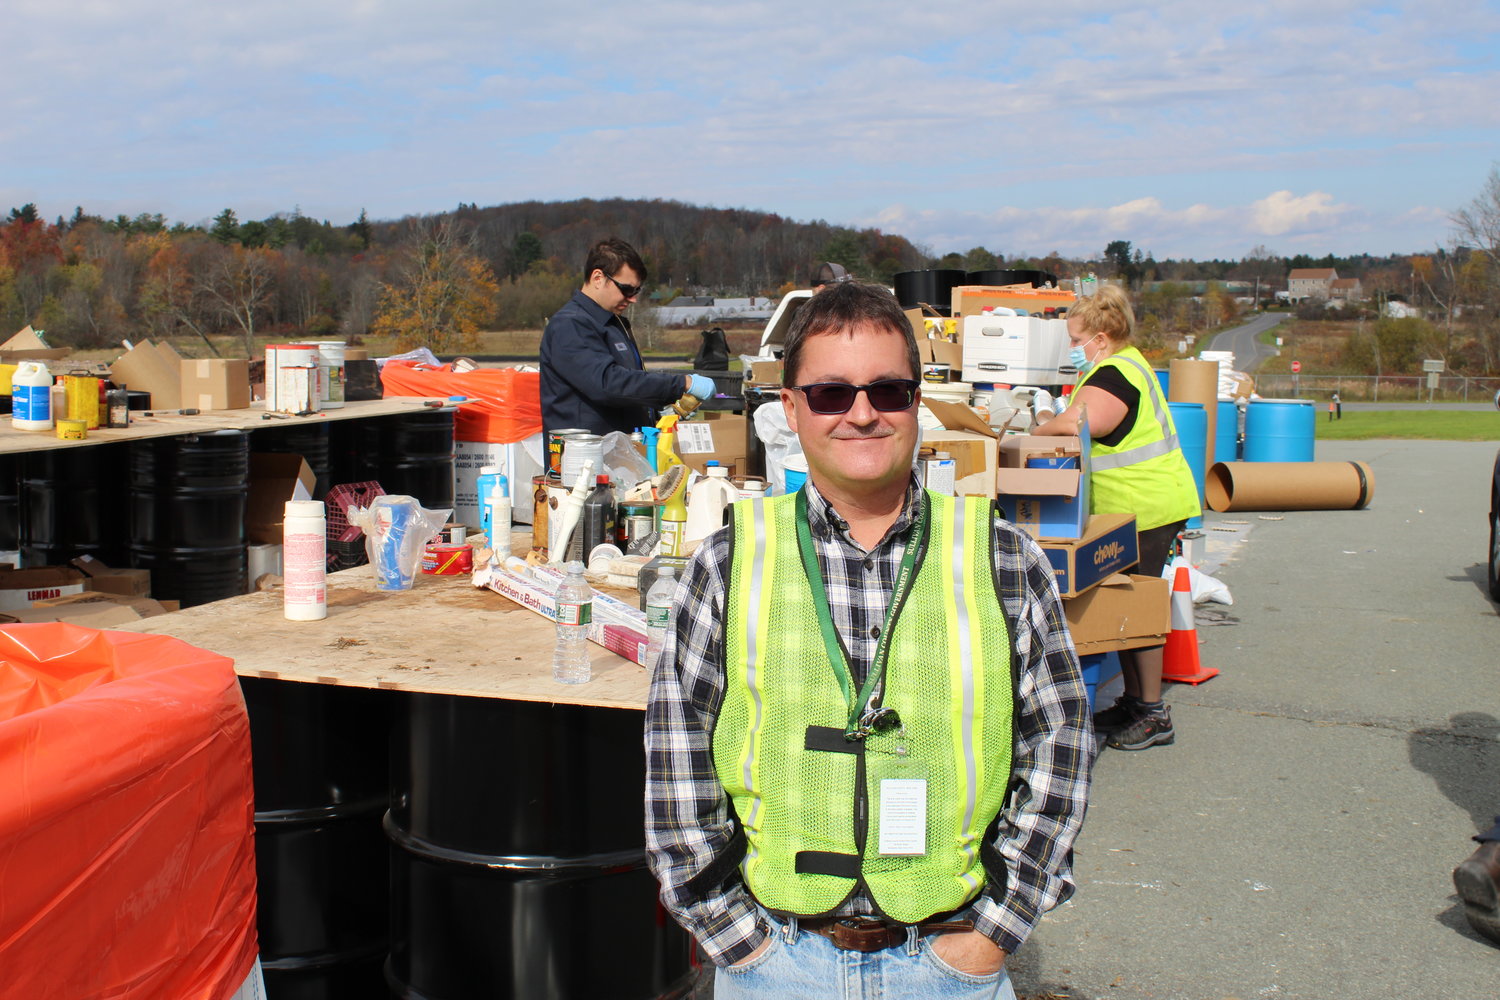 County recycling coordinator Bill Cutler at the Household Hazardous Waste Event.